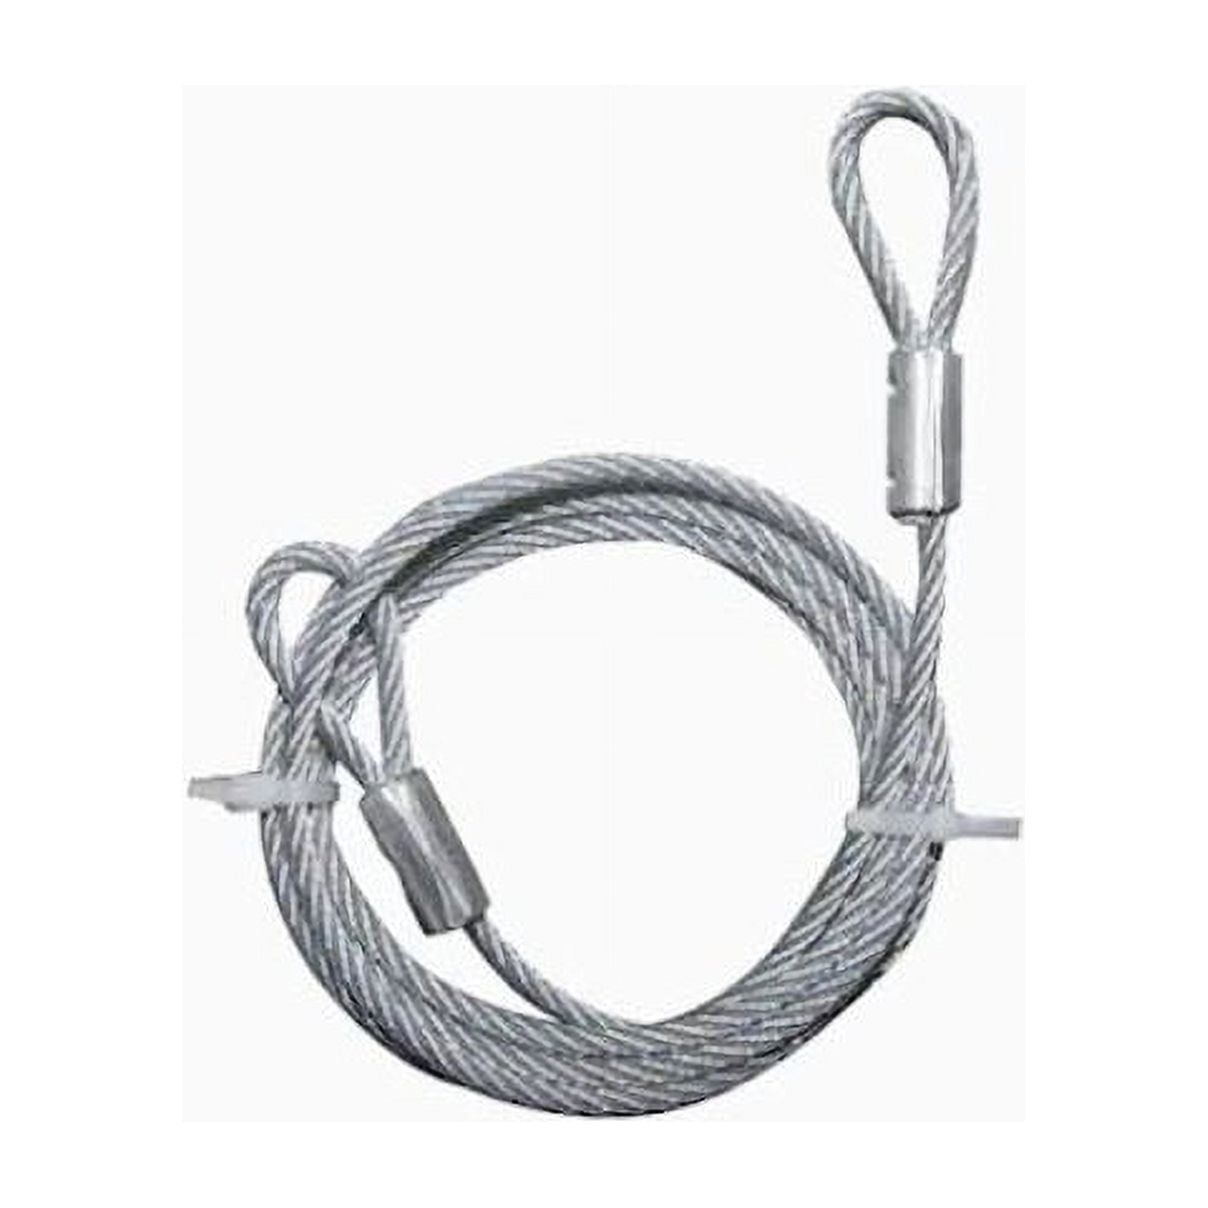 Blue Hawk 6-ft Galvanized Steel Wire Rope Security Cable # 0805287